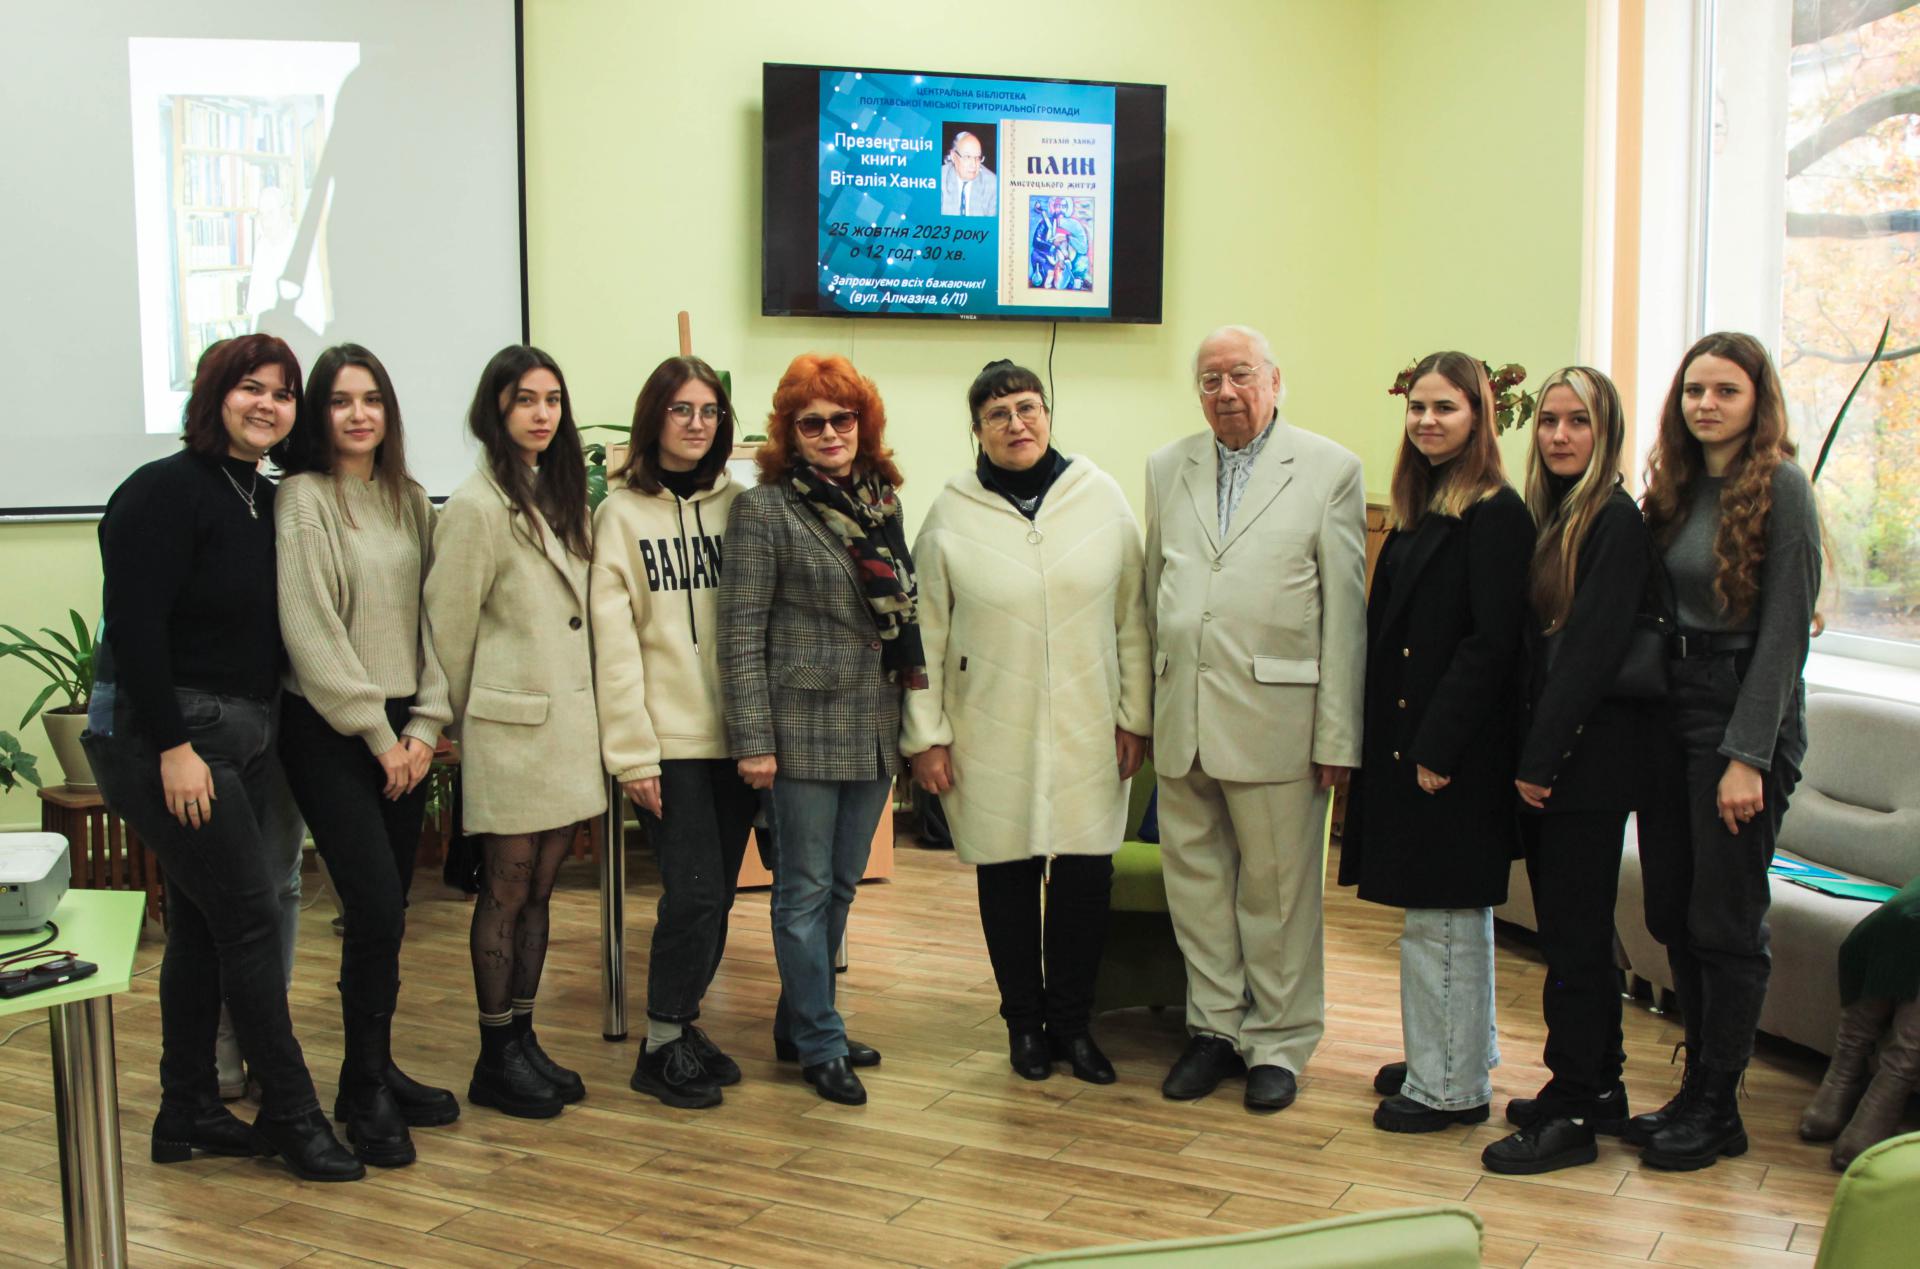 Polytechnic students attend the presentation of the art critic’s book